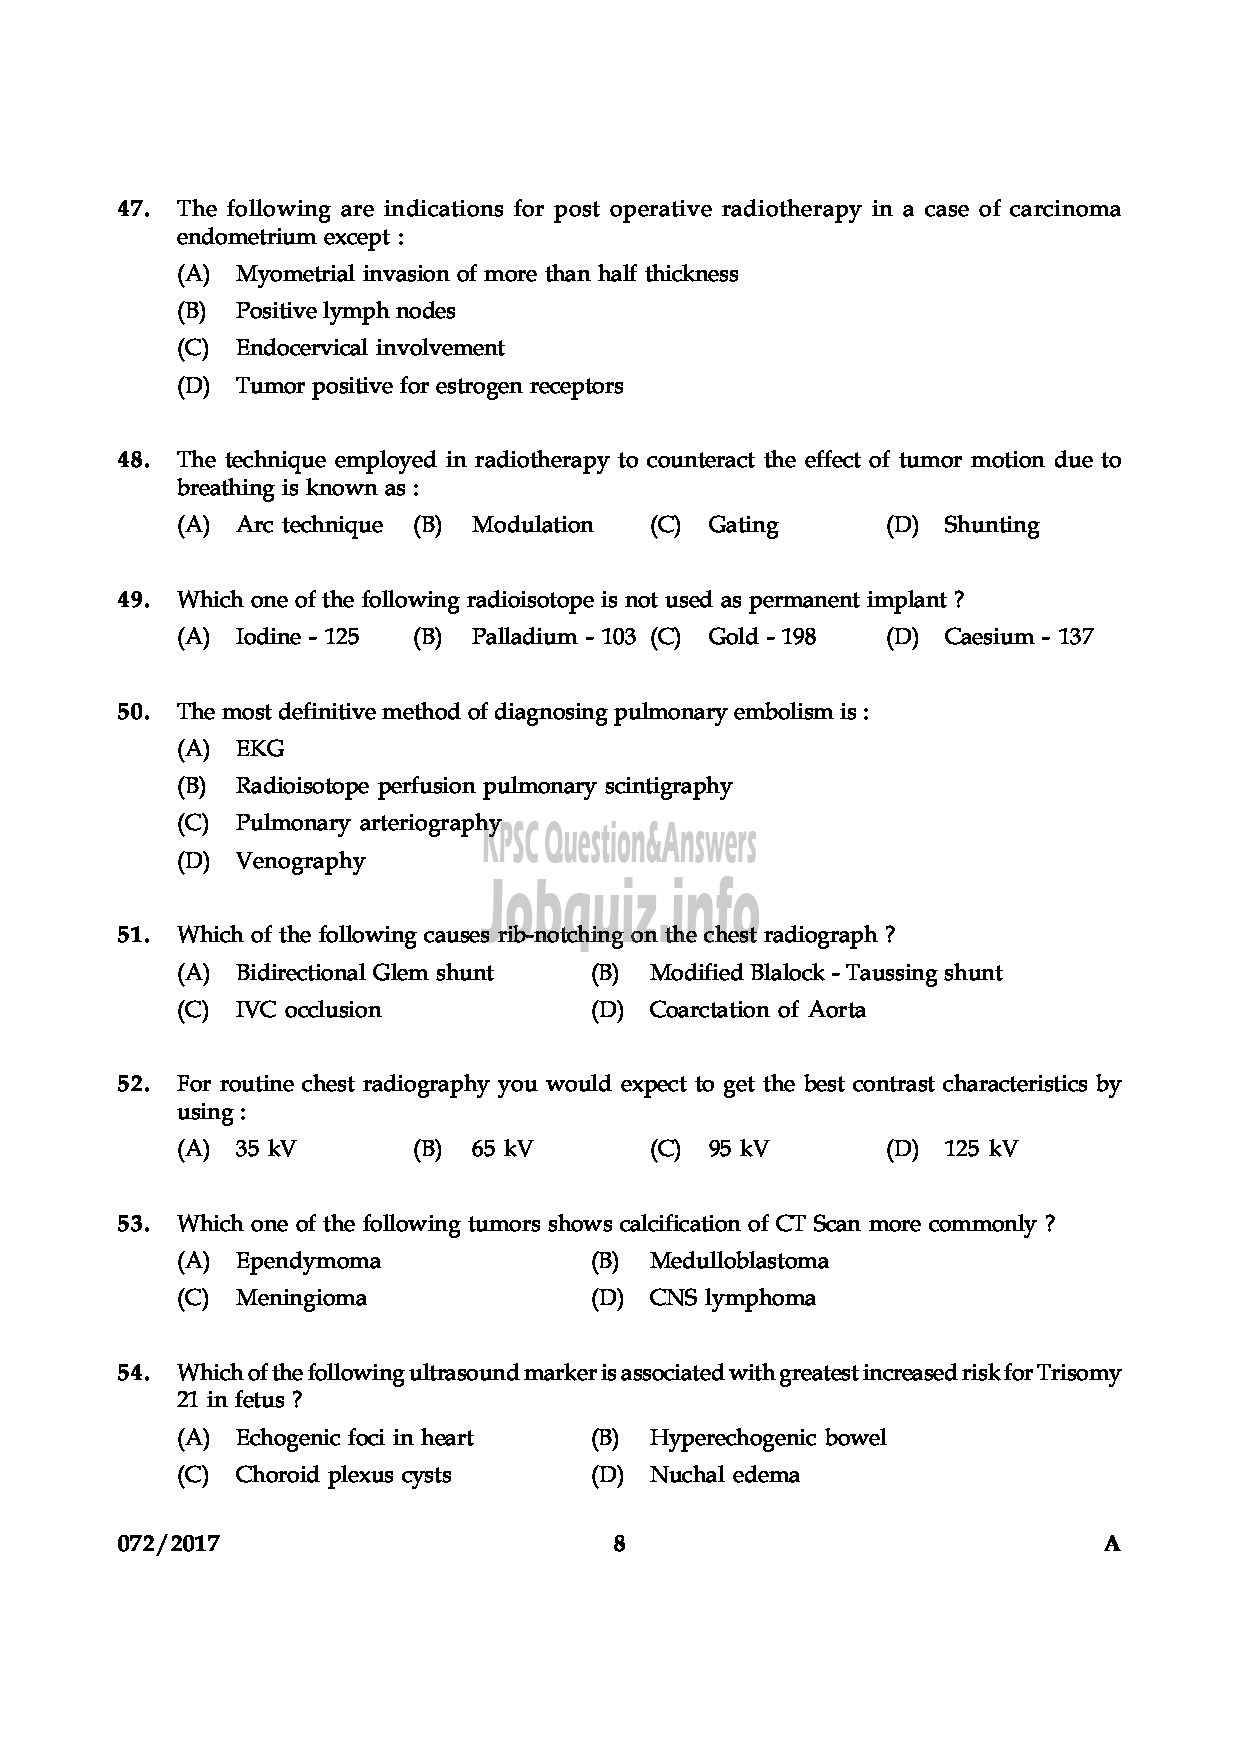 Kerala PSC Question Paper - RADIOGRAPHER GR.II HEALTH SERVICES QUESTION PAPER-7